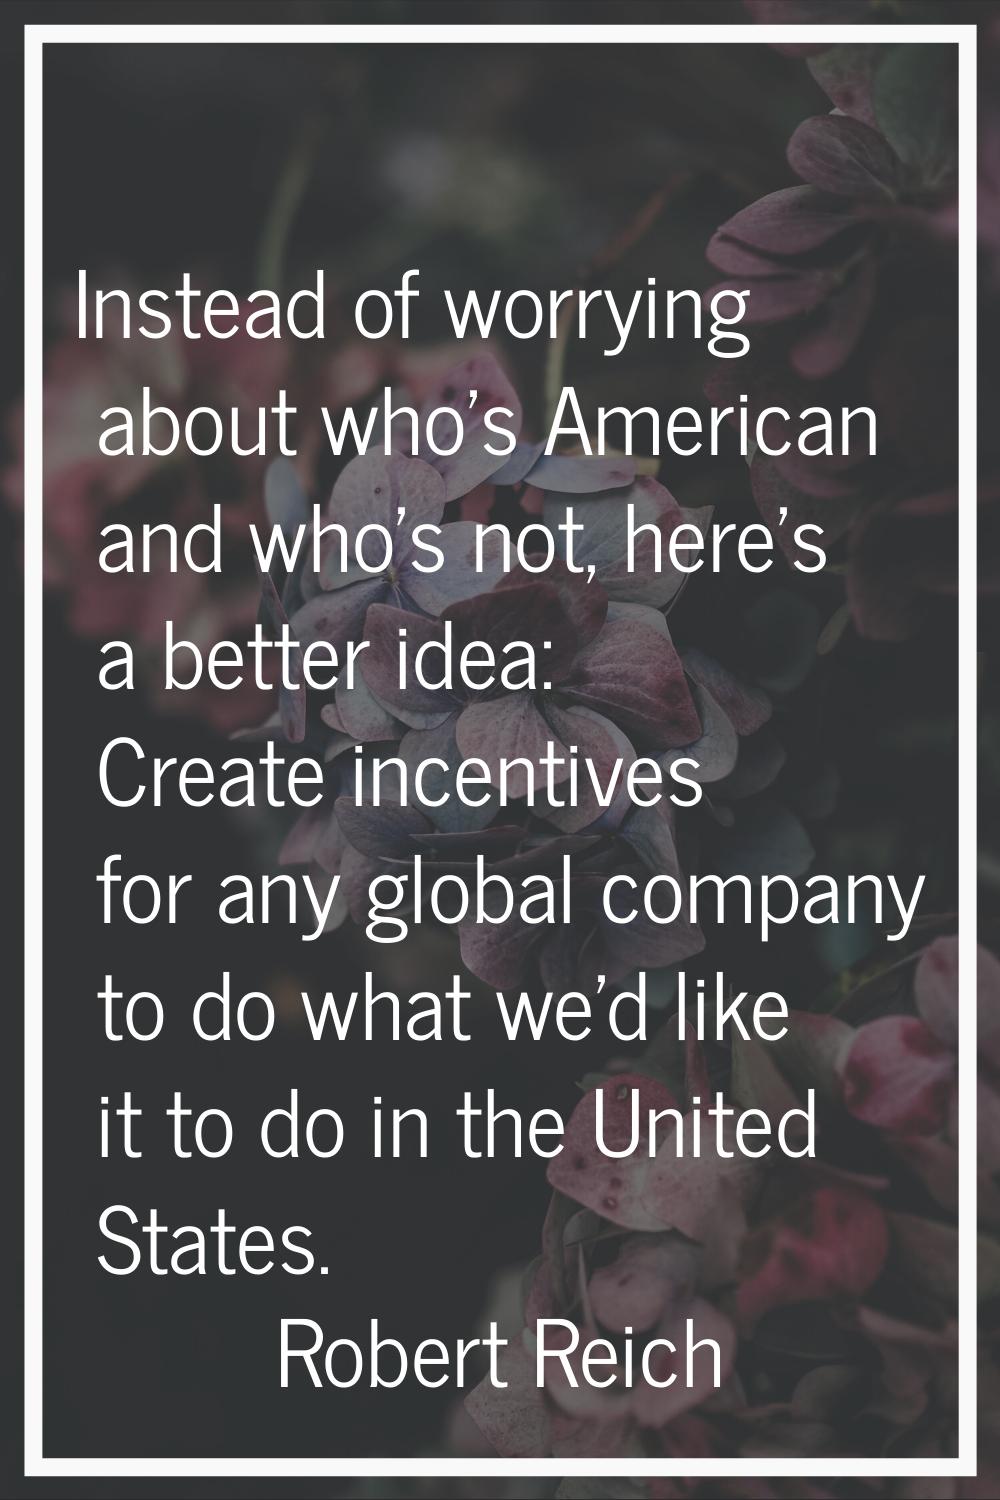 Instead of worrying about who's American and who's not, here's a better idea: Create incentives for